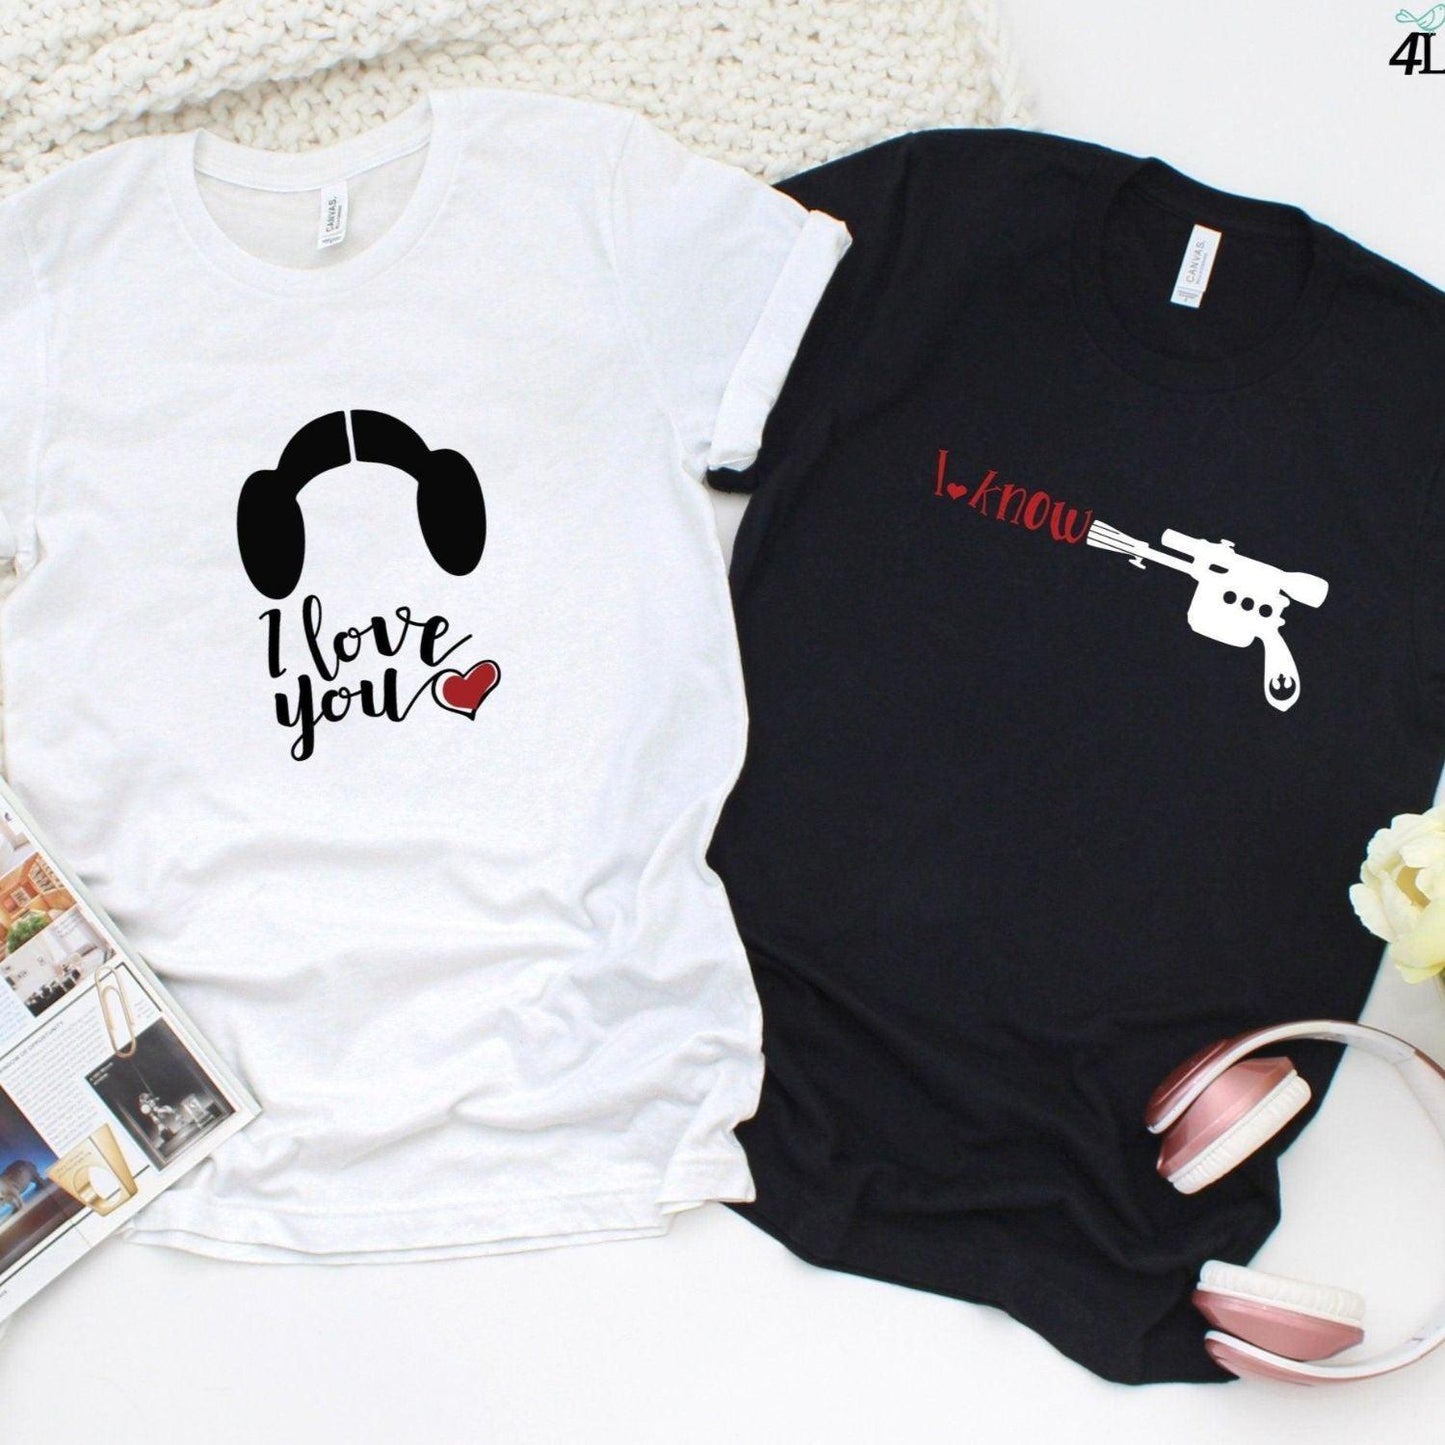 Mr & Mrs Matching Outfits: I Love You I Know - Perfect Valentine's Day Present - 4Lovebirds